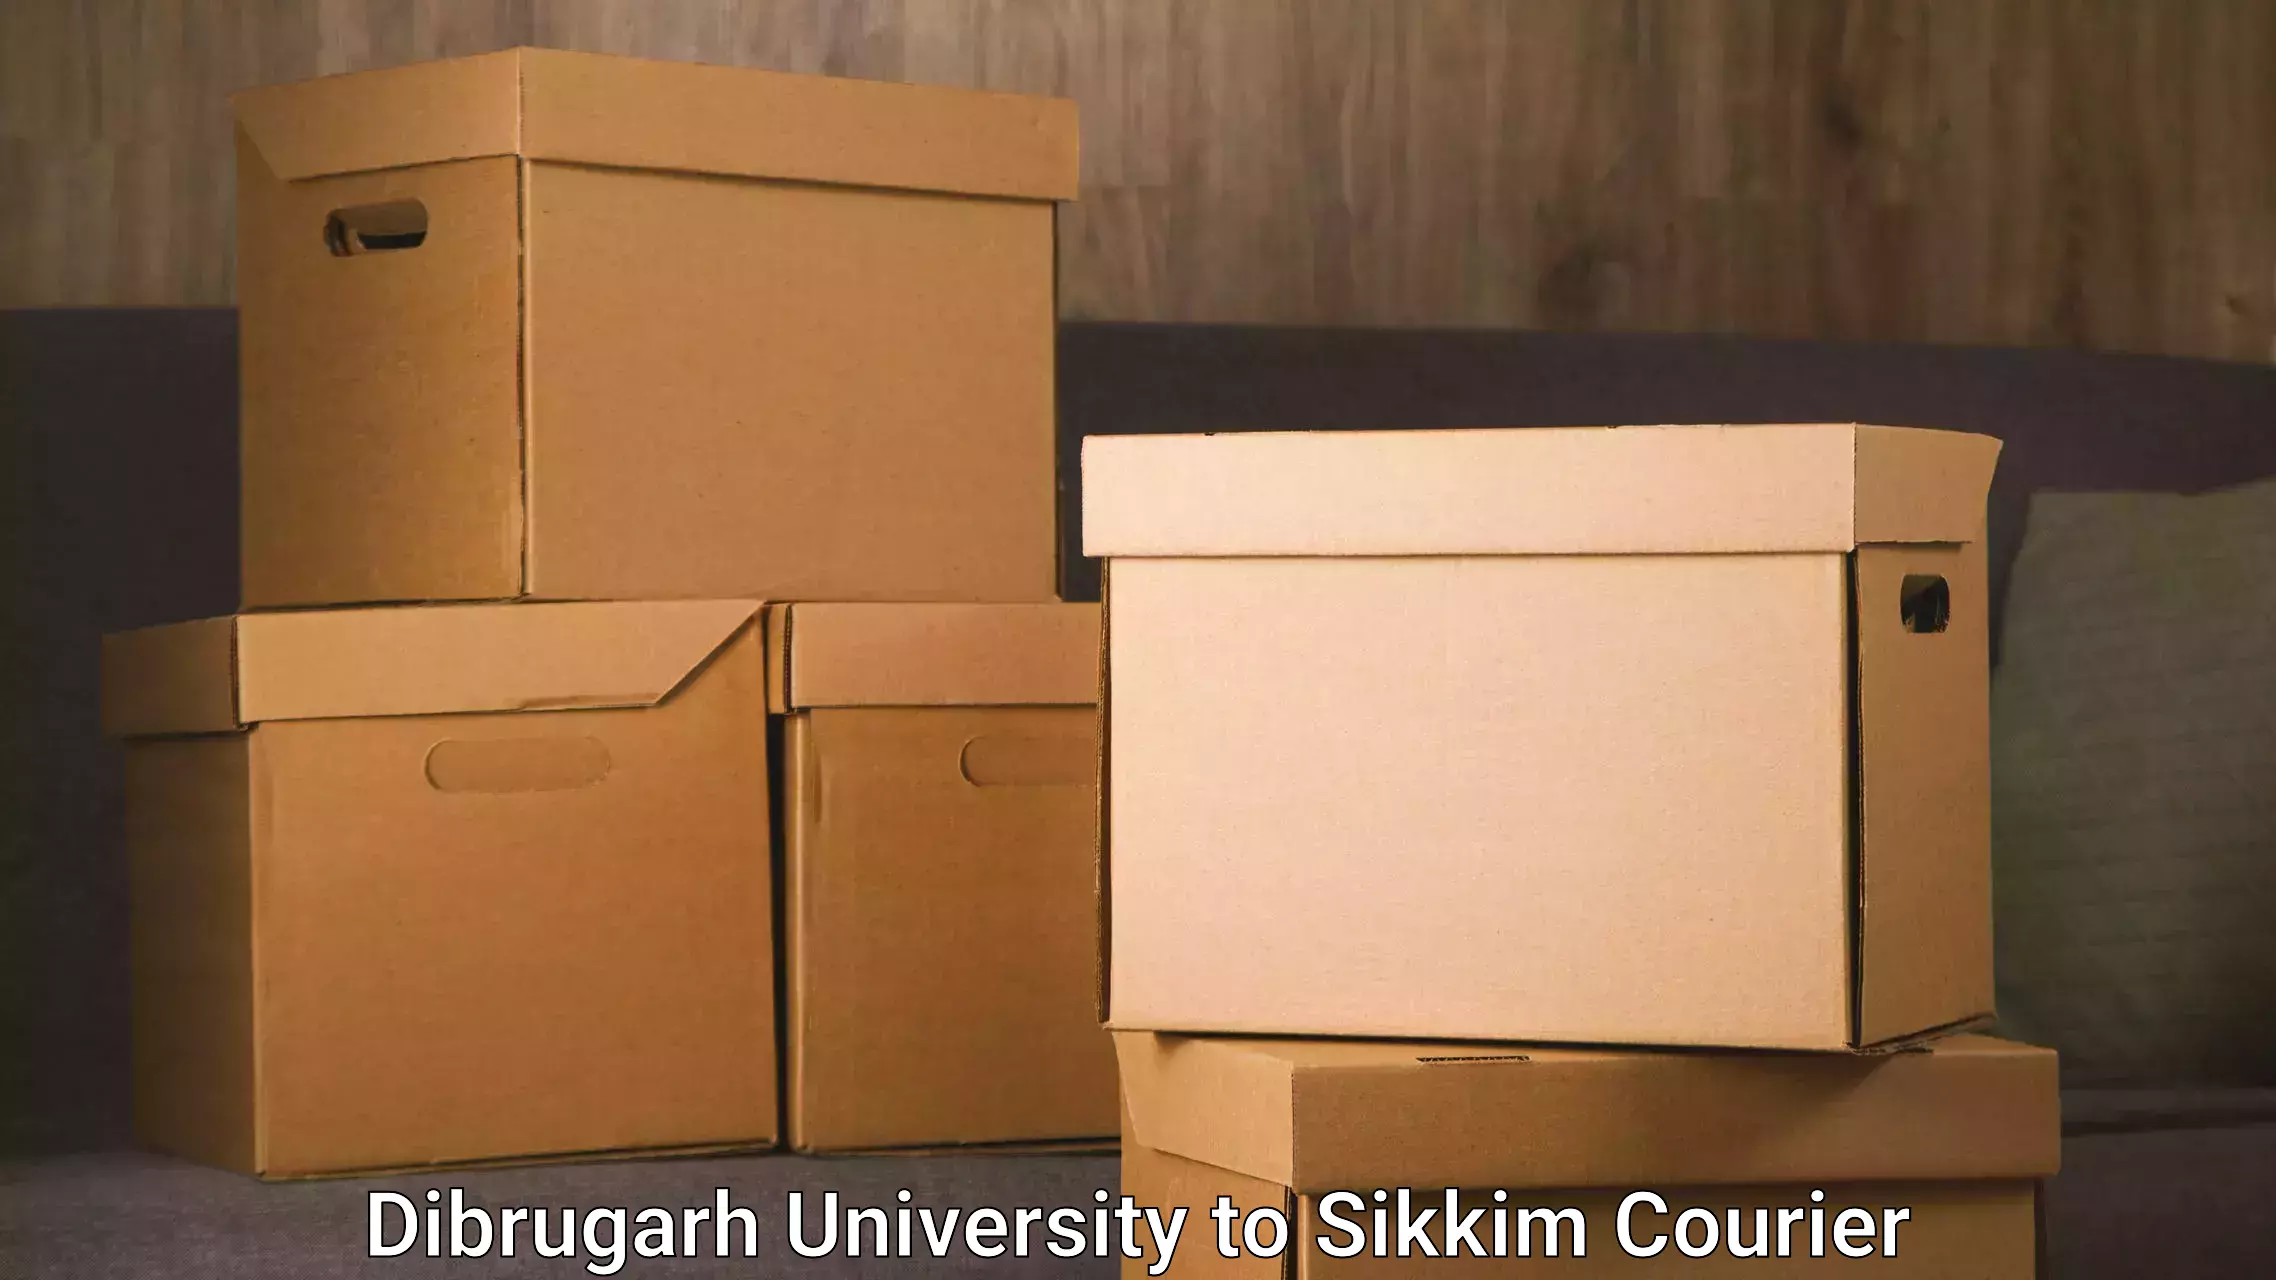 Express delivery network Dibrugarh University to West Sikkim